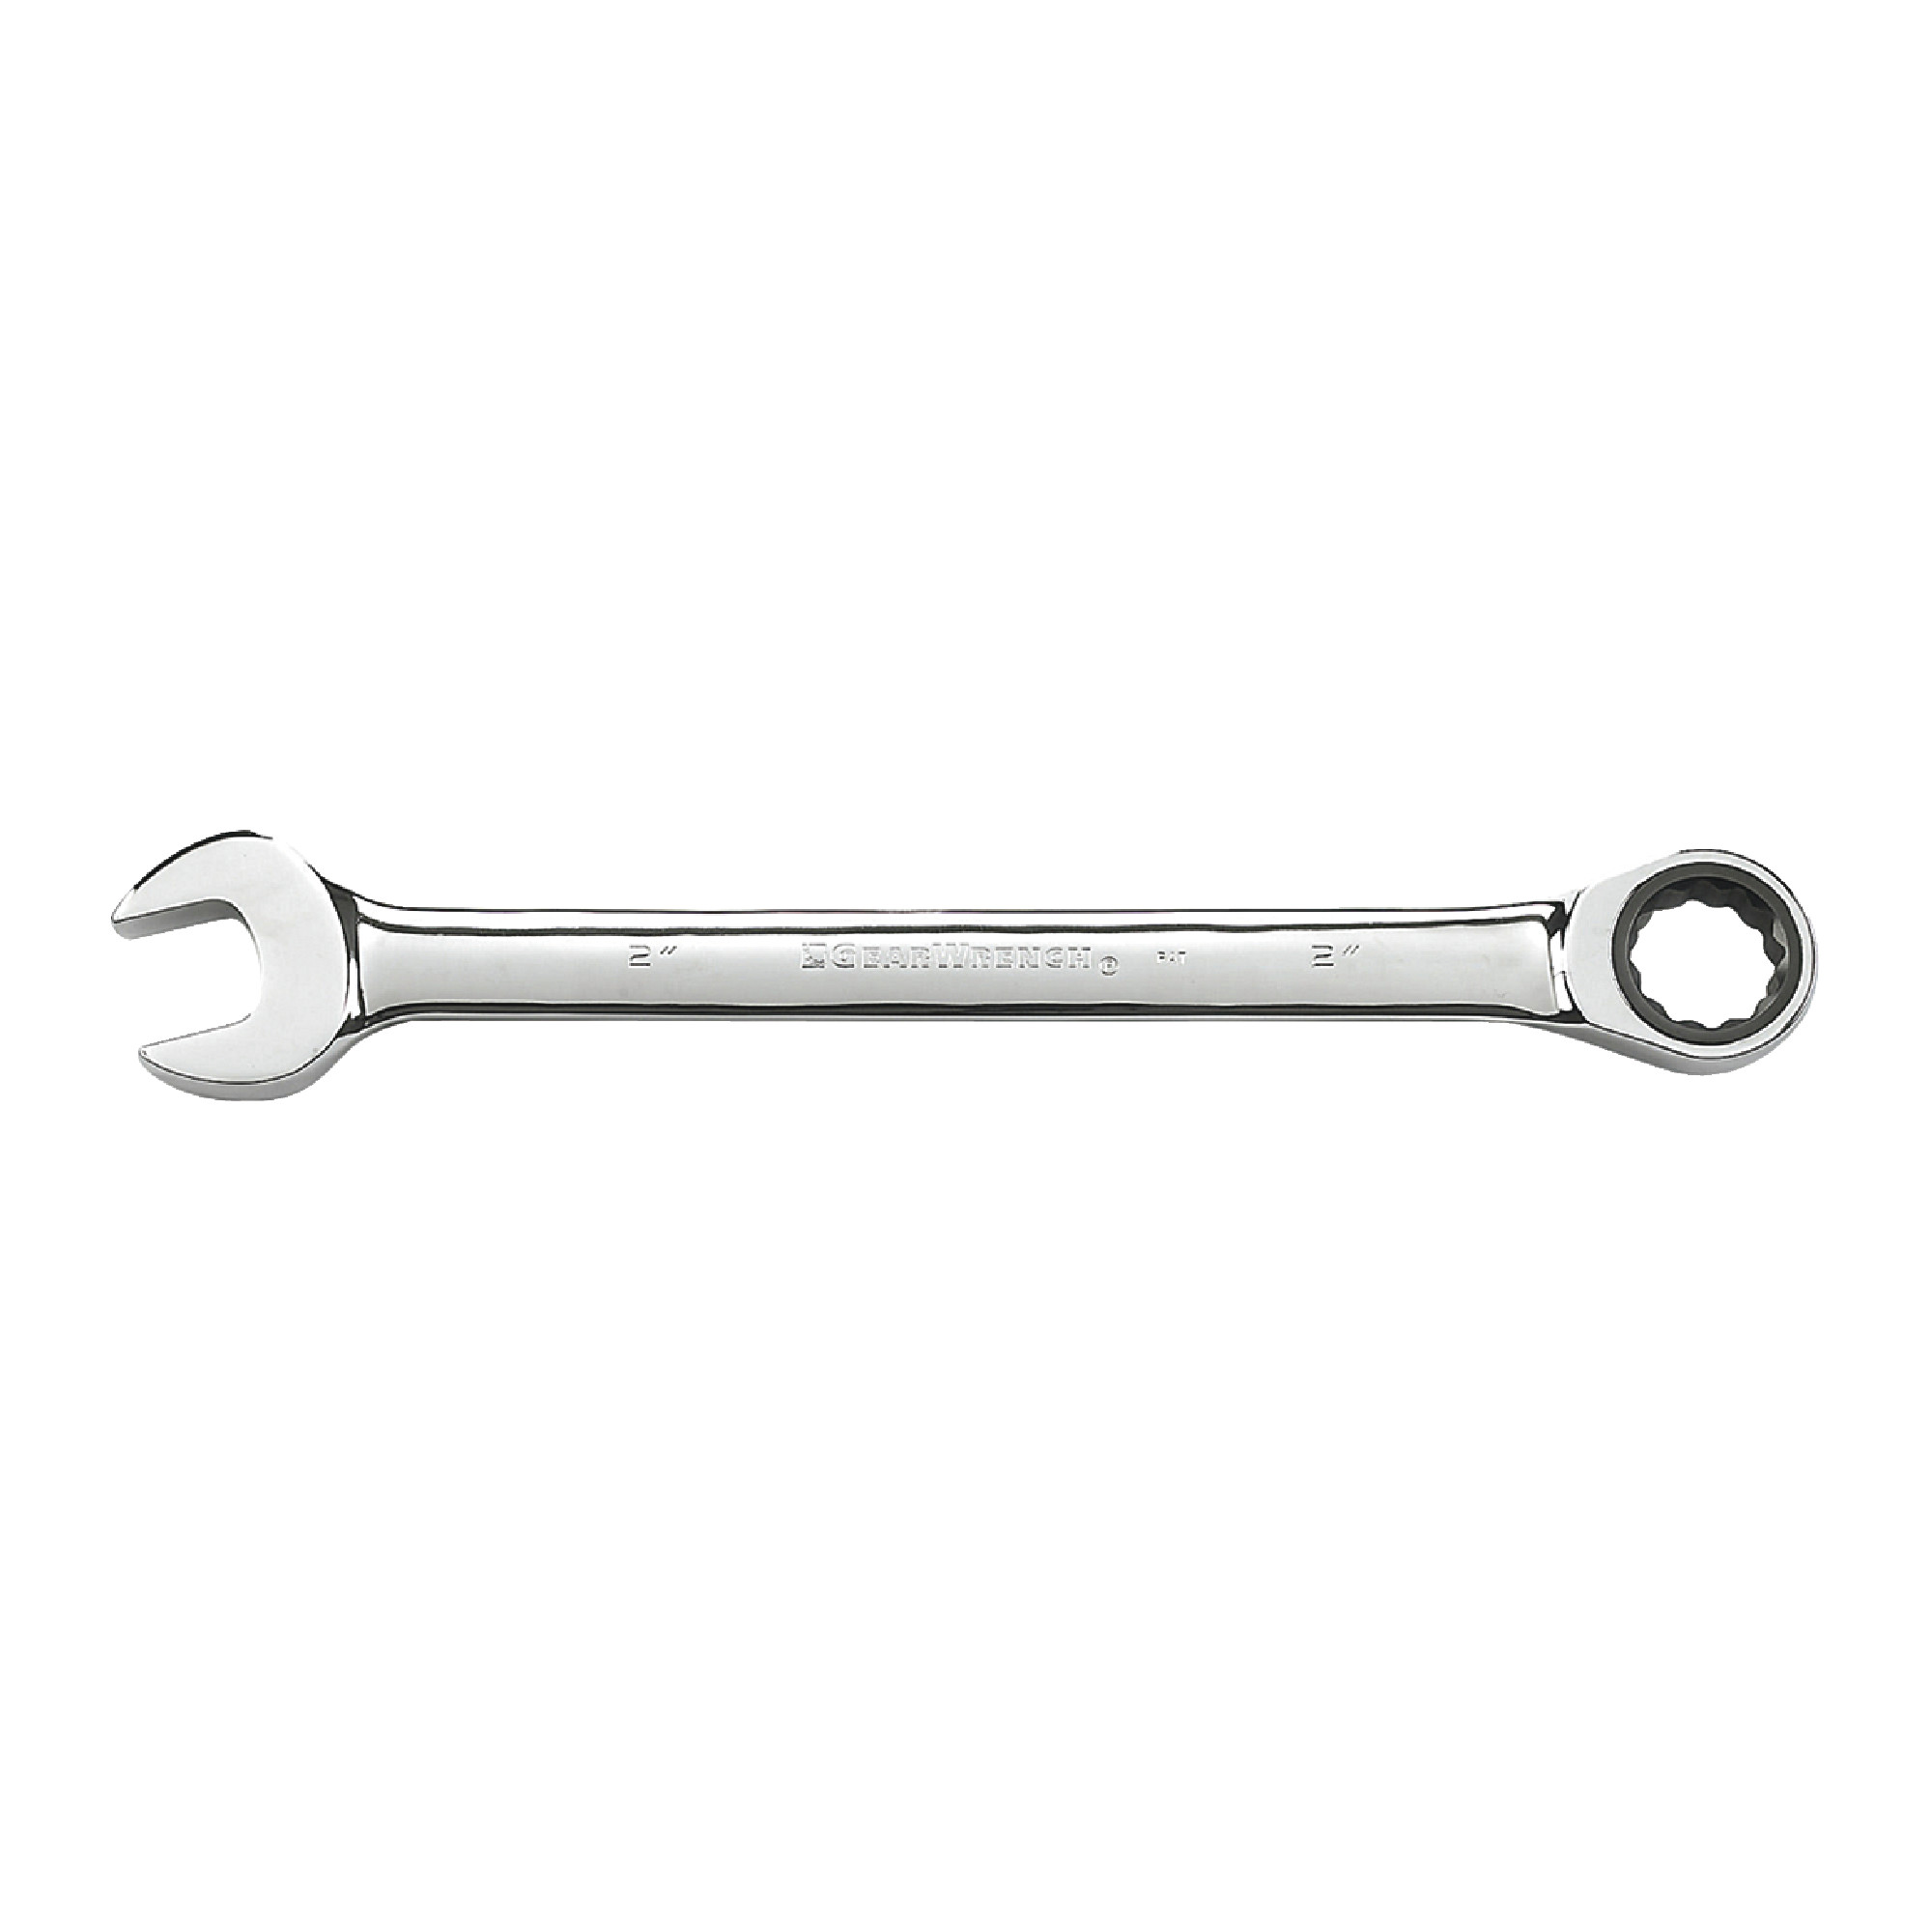 1/4" 12 Point Ratcheting Combination Wrench